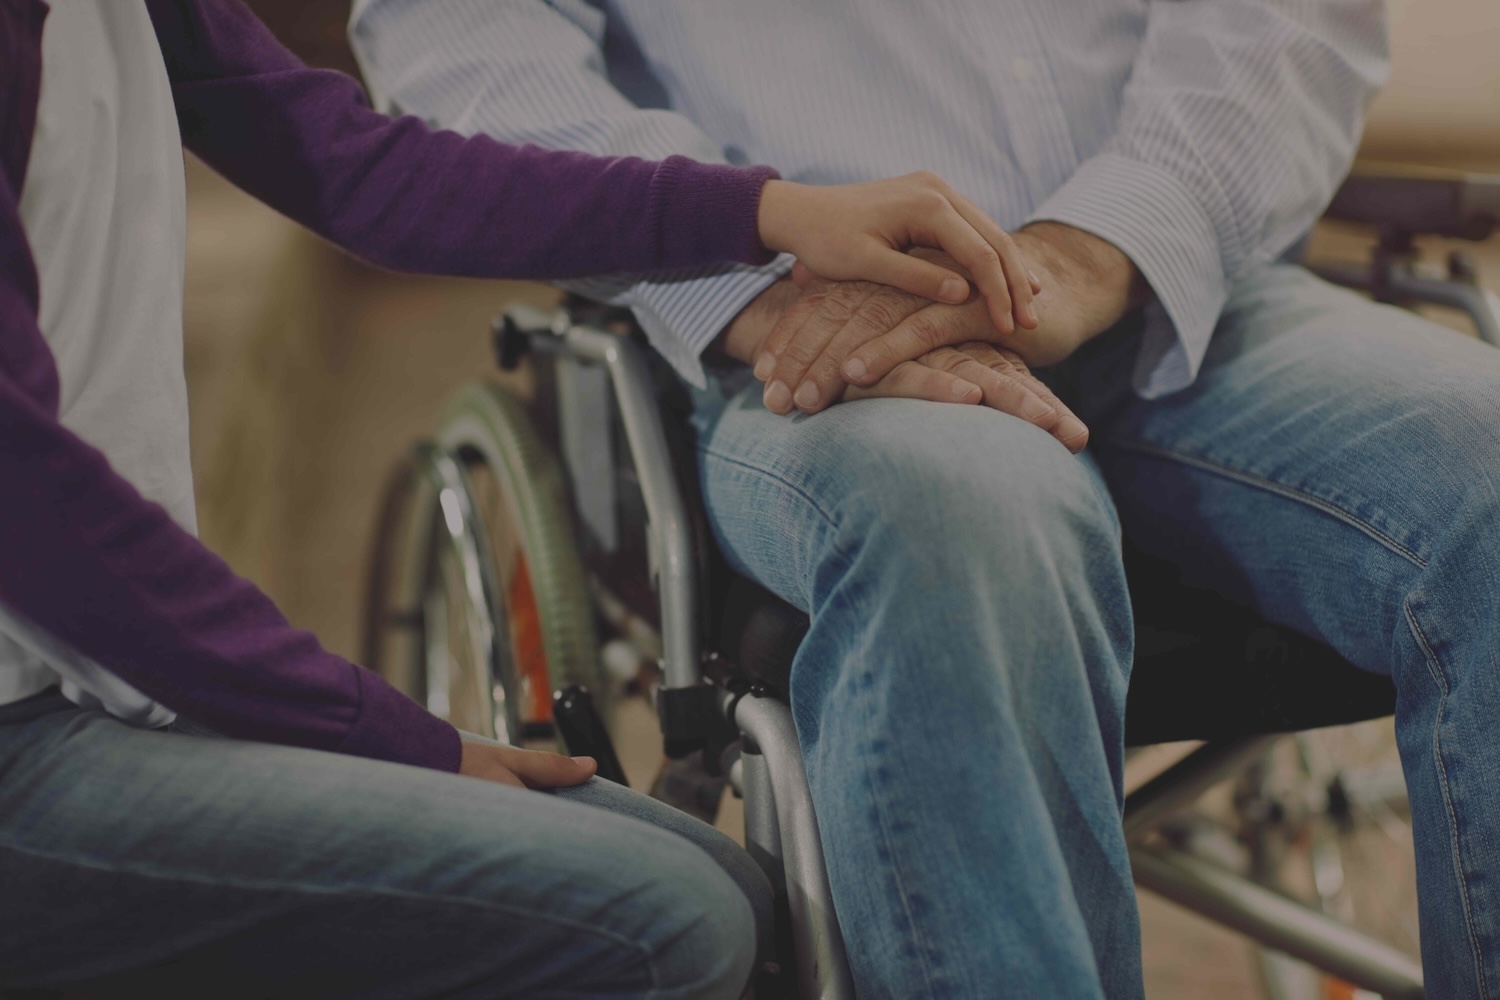 A man and a woman sit next to each other. The man is in a wheelchair. The woman is holding the man's hand.